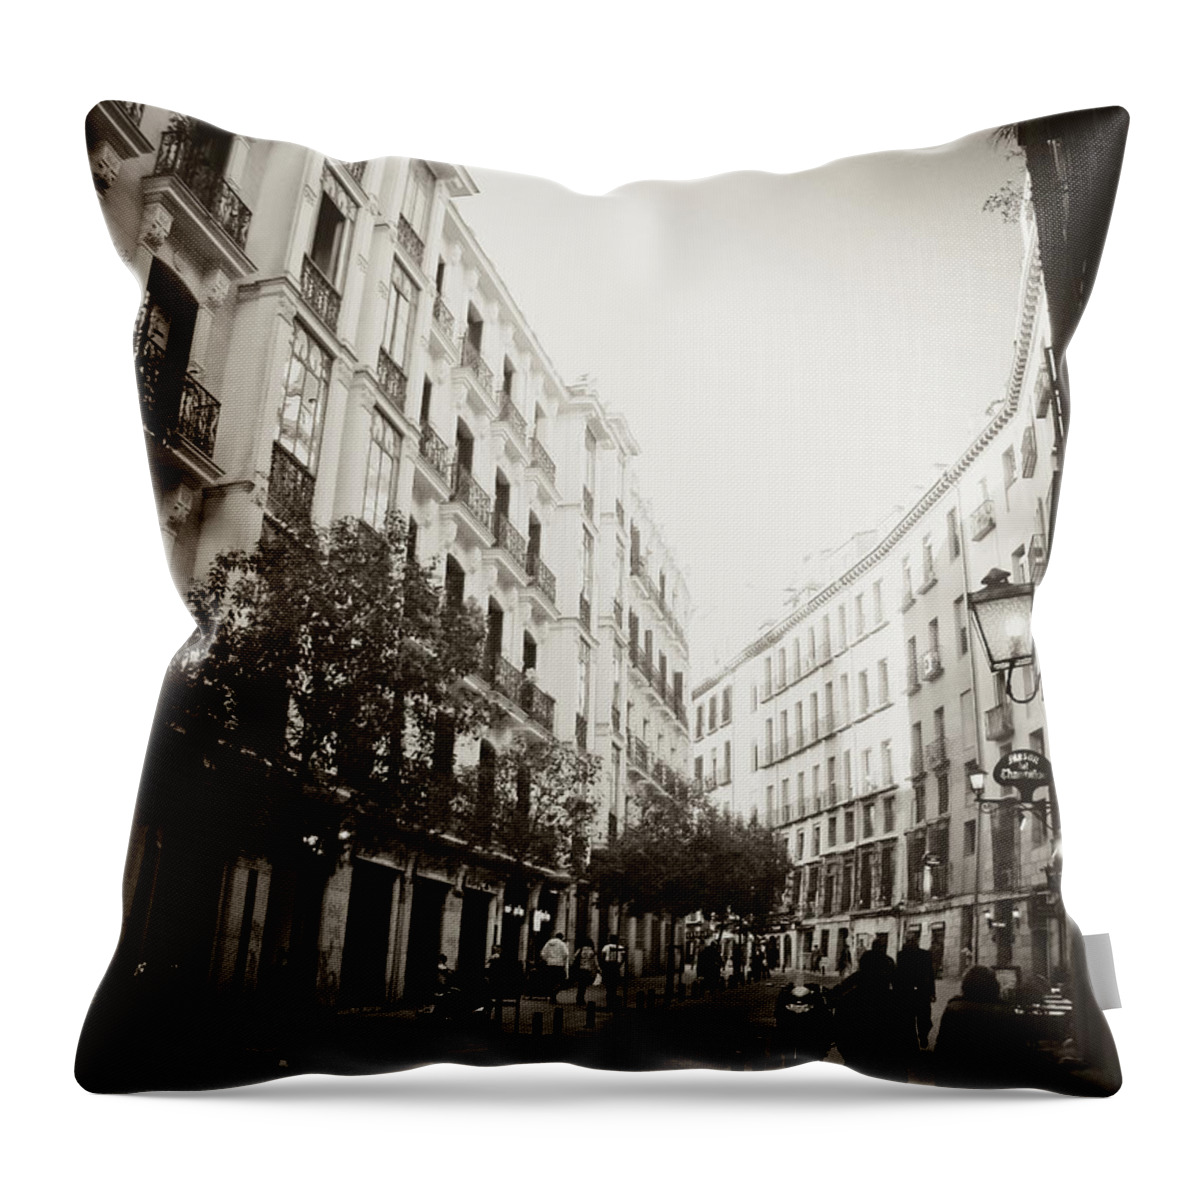 Spain Throw Pillow featuring the photograph Madrid Afternoon by Ana V Ramirez